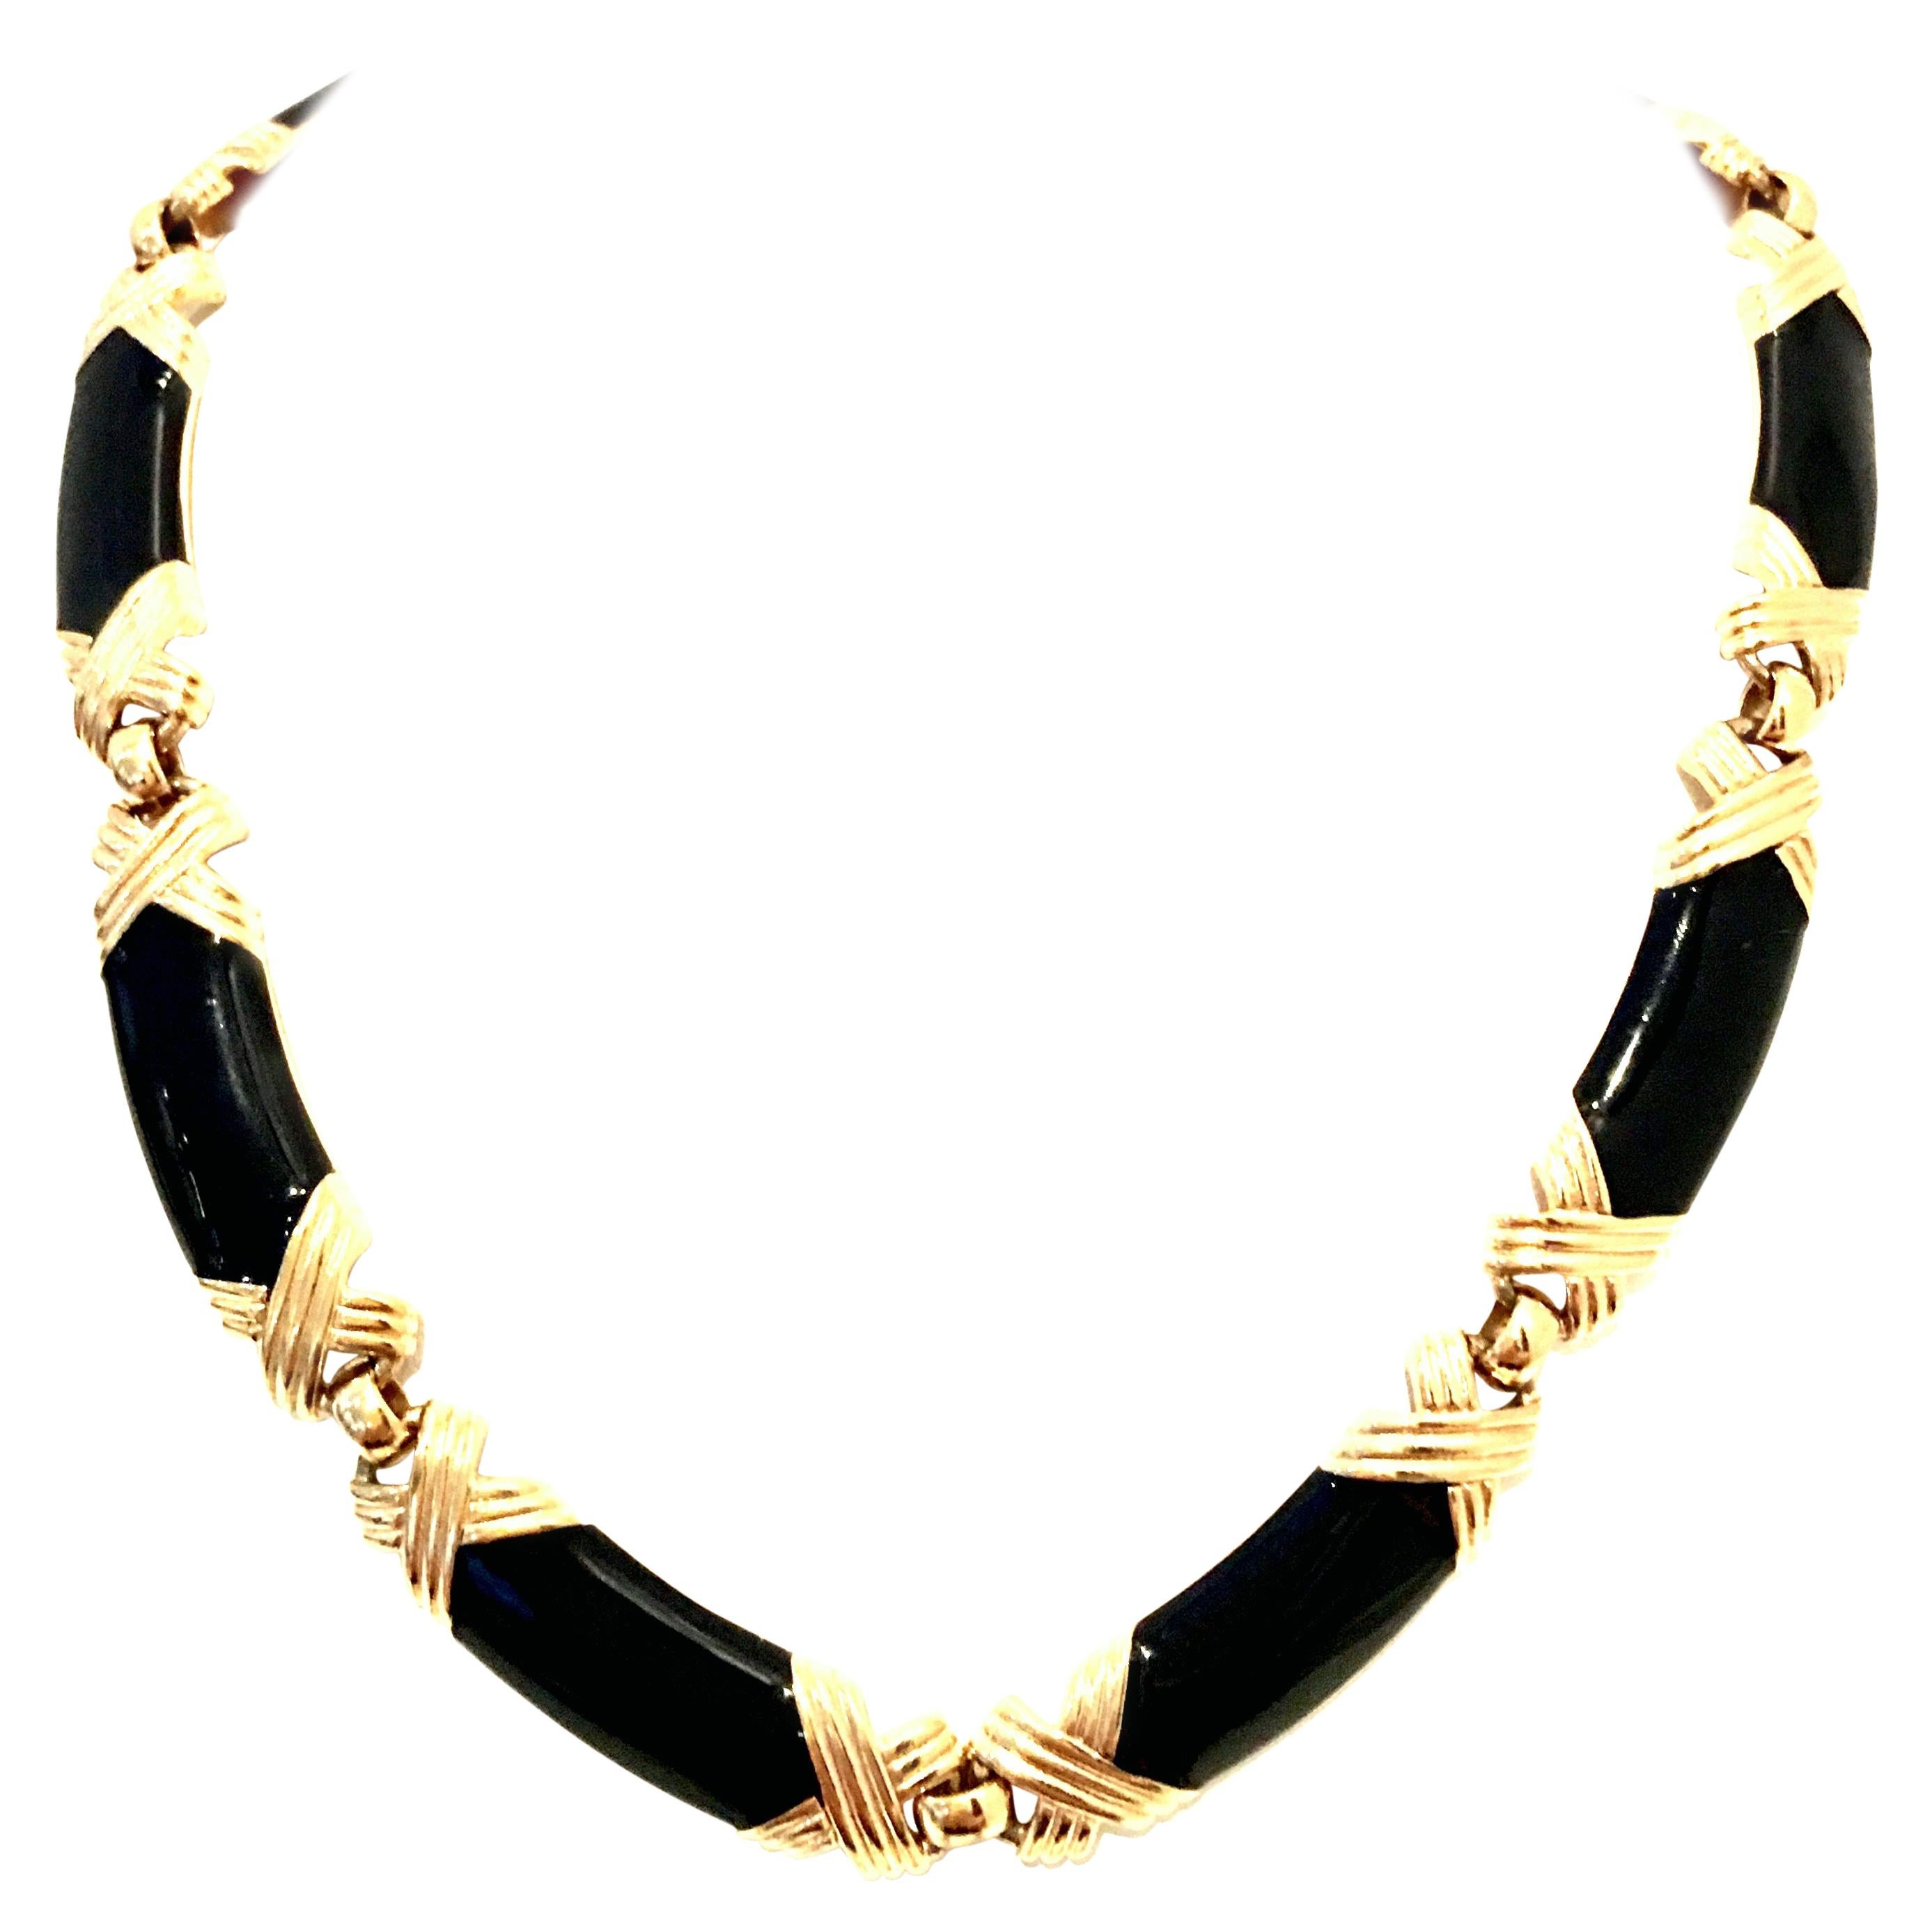 20th Century Gold & Enamel Choker Style Link Necklace By, Monet